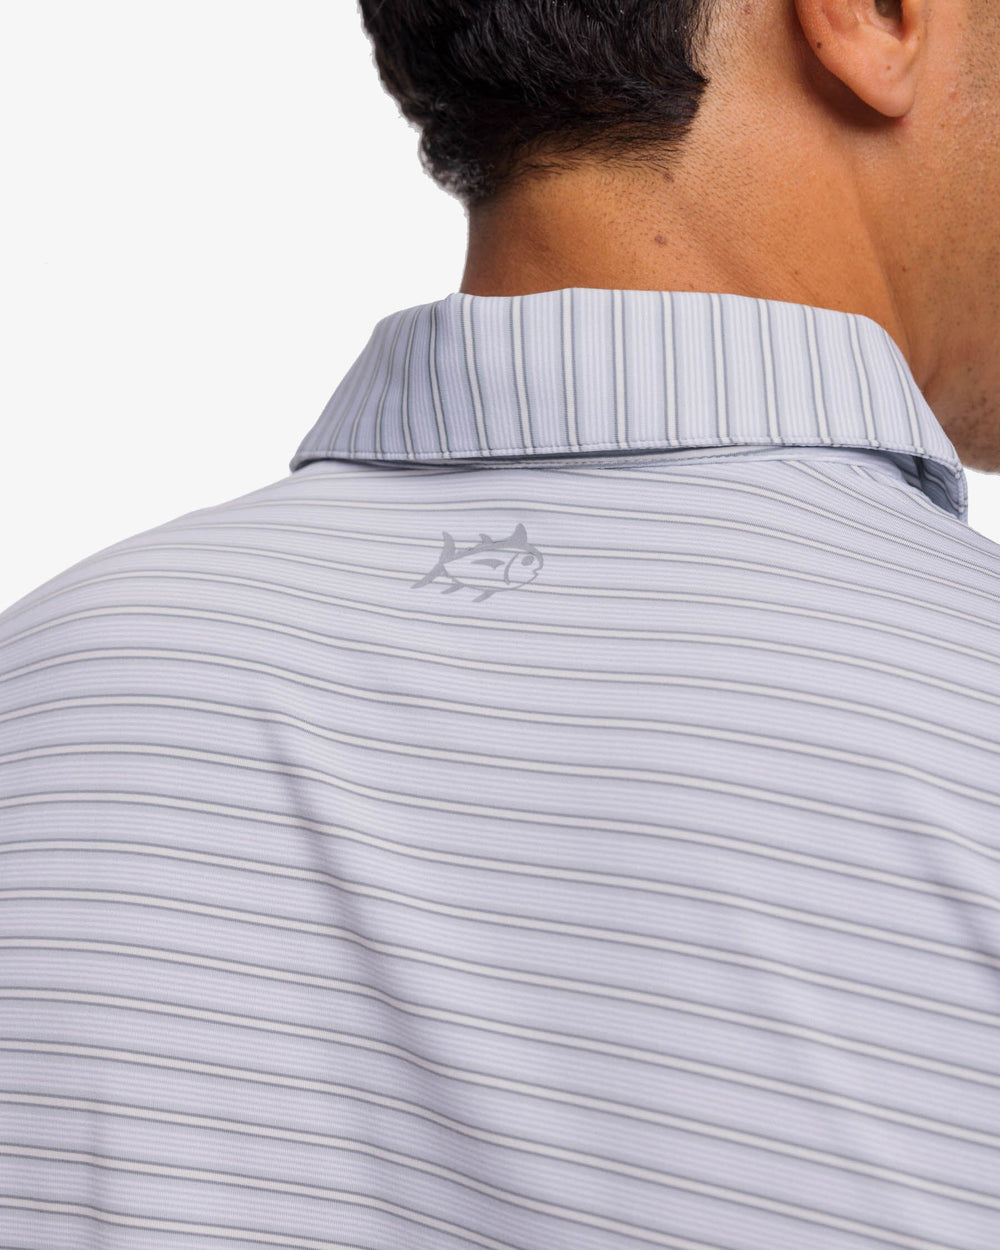 The yoke view of the Southern Tide Brrreeze Crawford Stripe Performance Polo Shirt by Southern Tide - Slate Grey